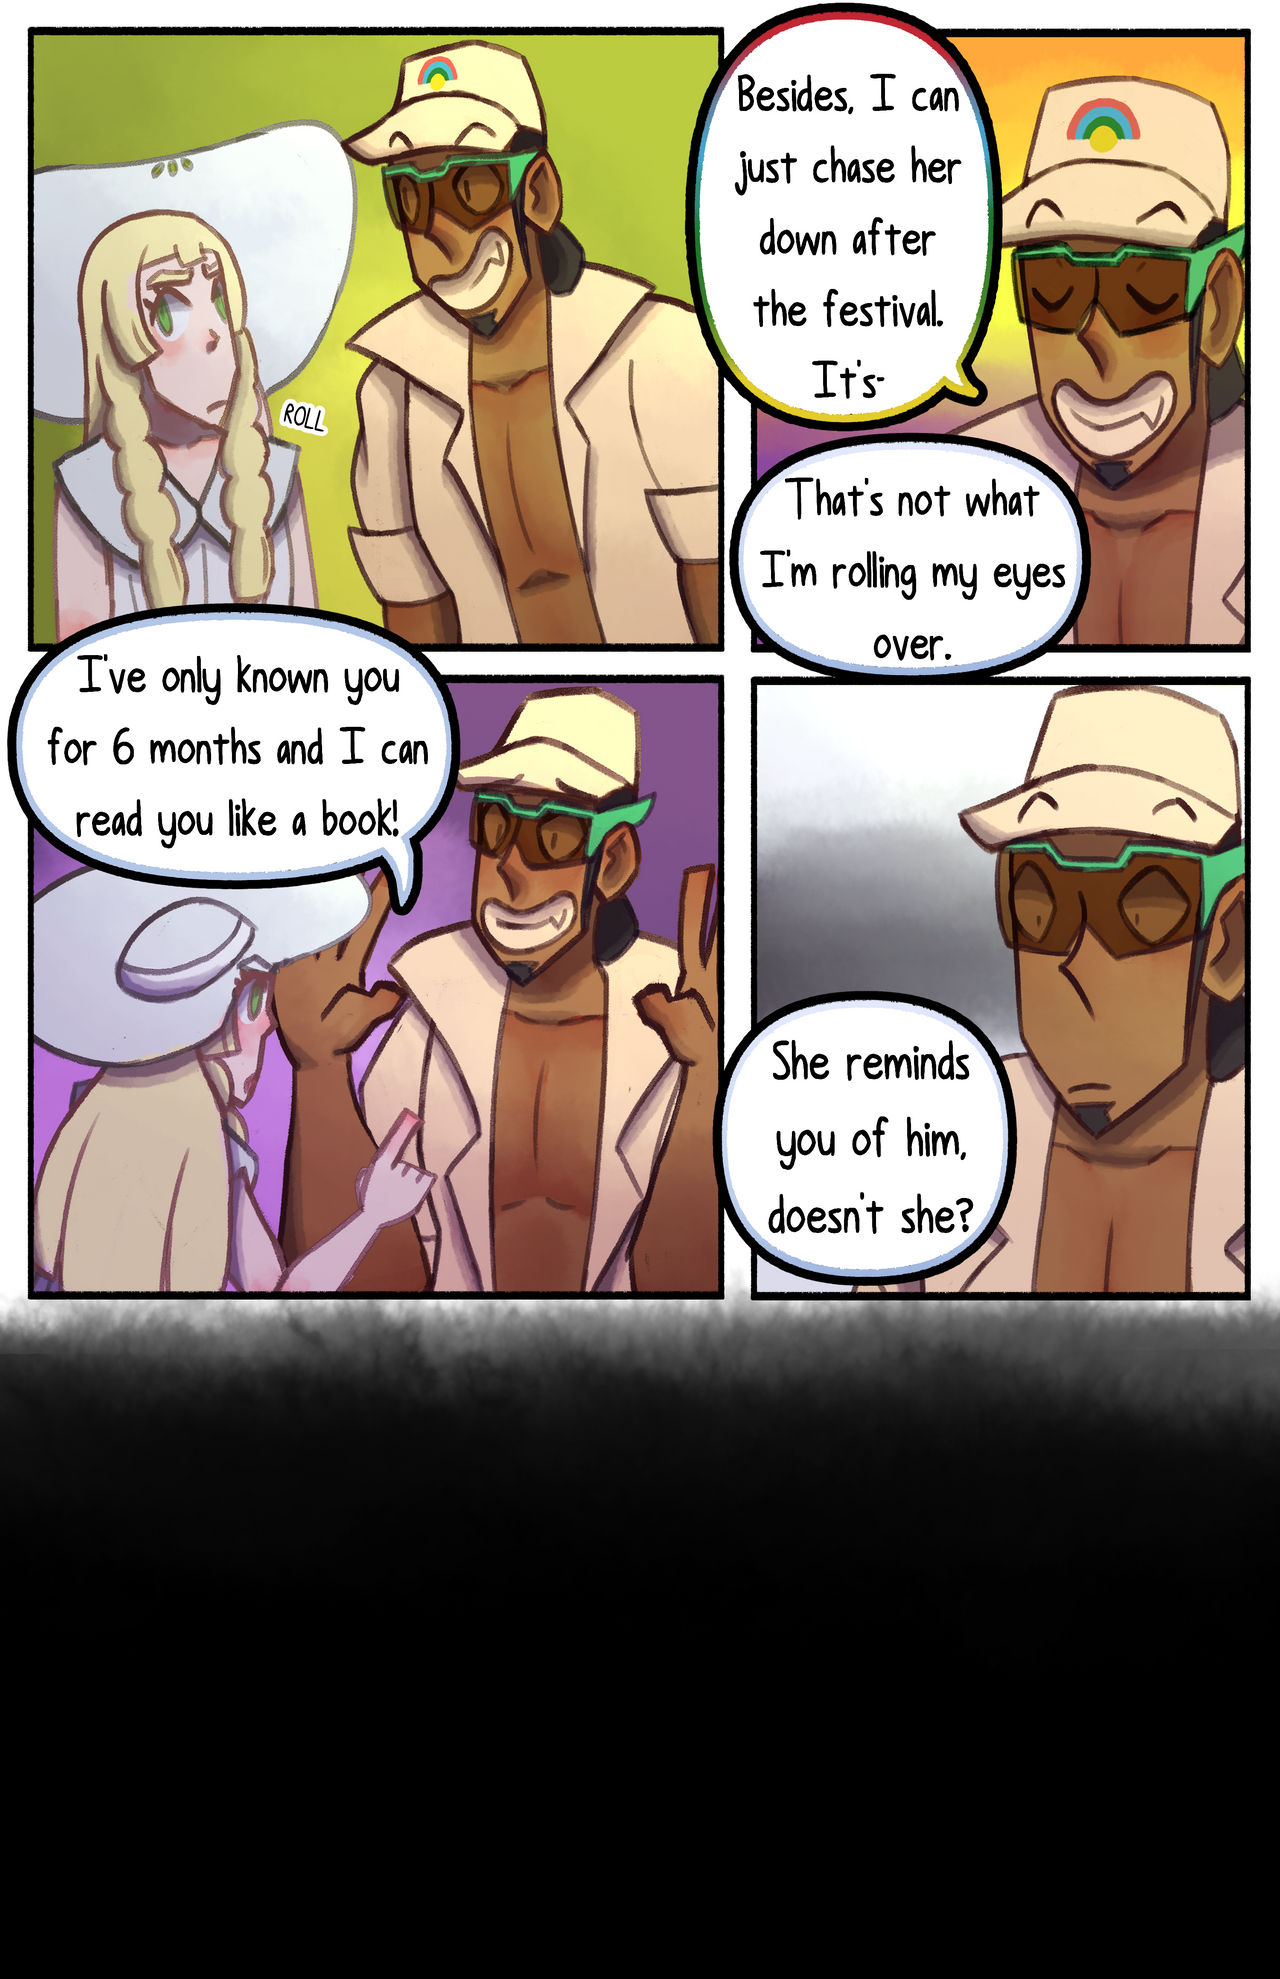 bloom__an_ultra_moon_nuzlocke___chapter_1__page_30_by_zombie_zcorge_df9btwt-fullview.jpg